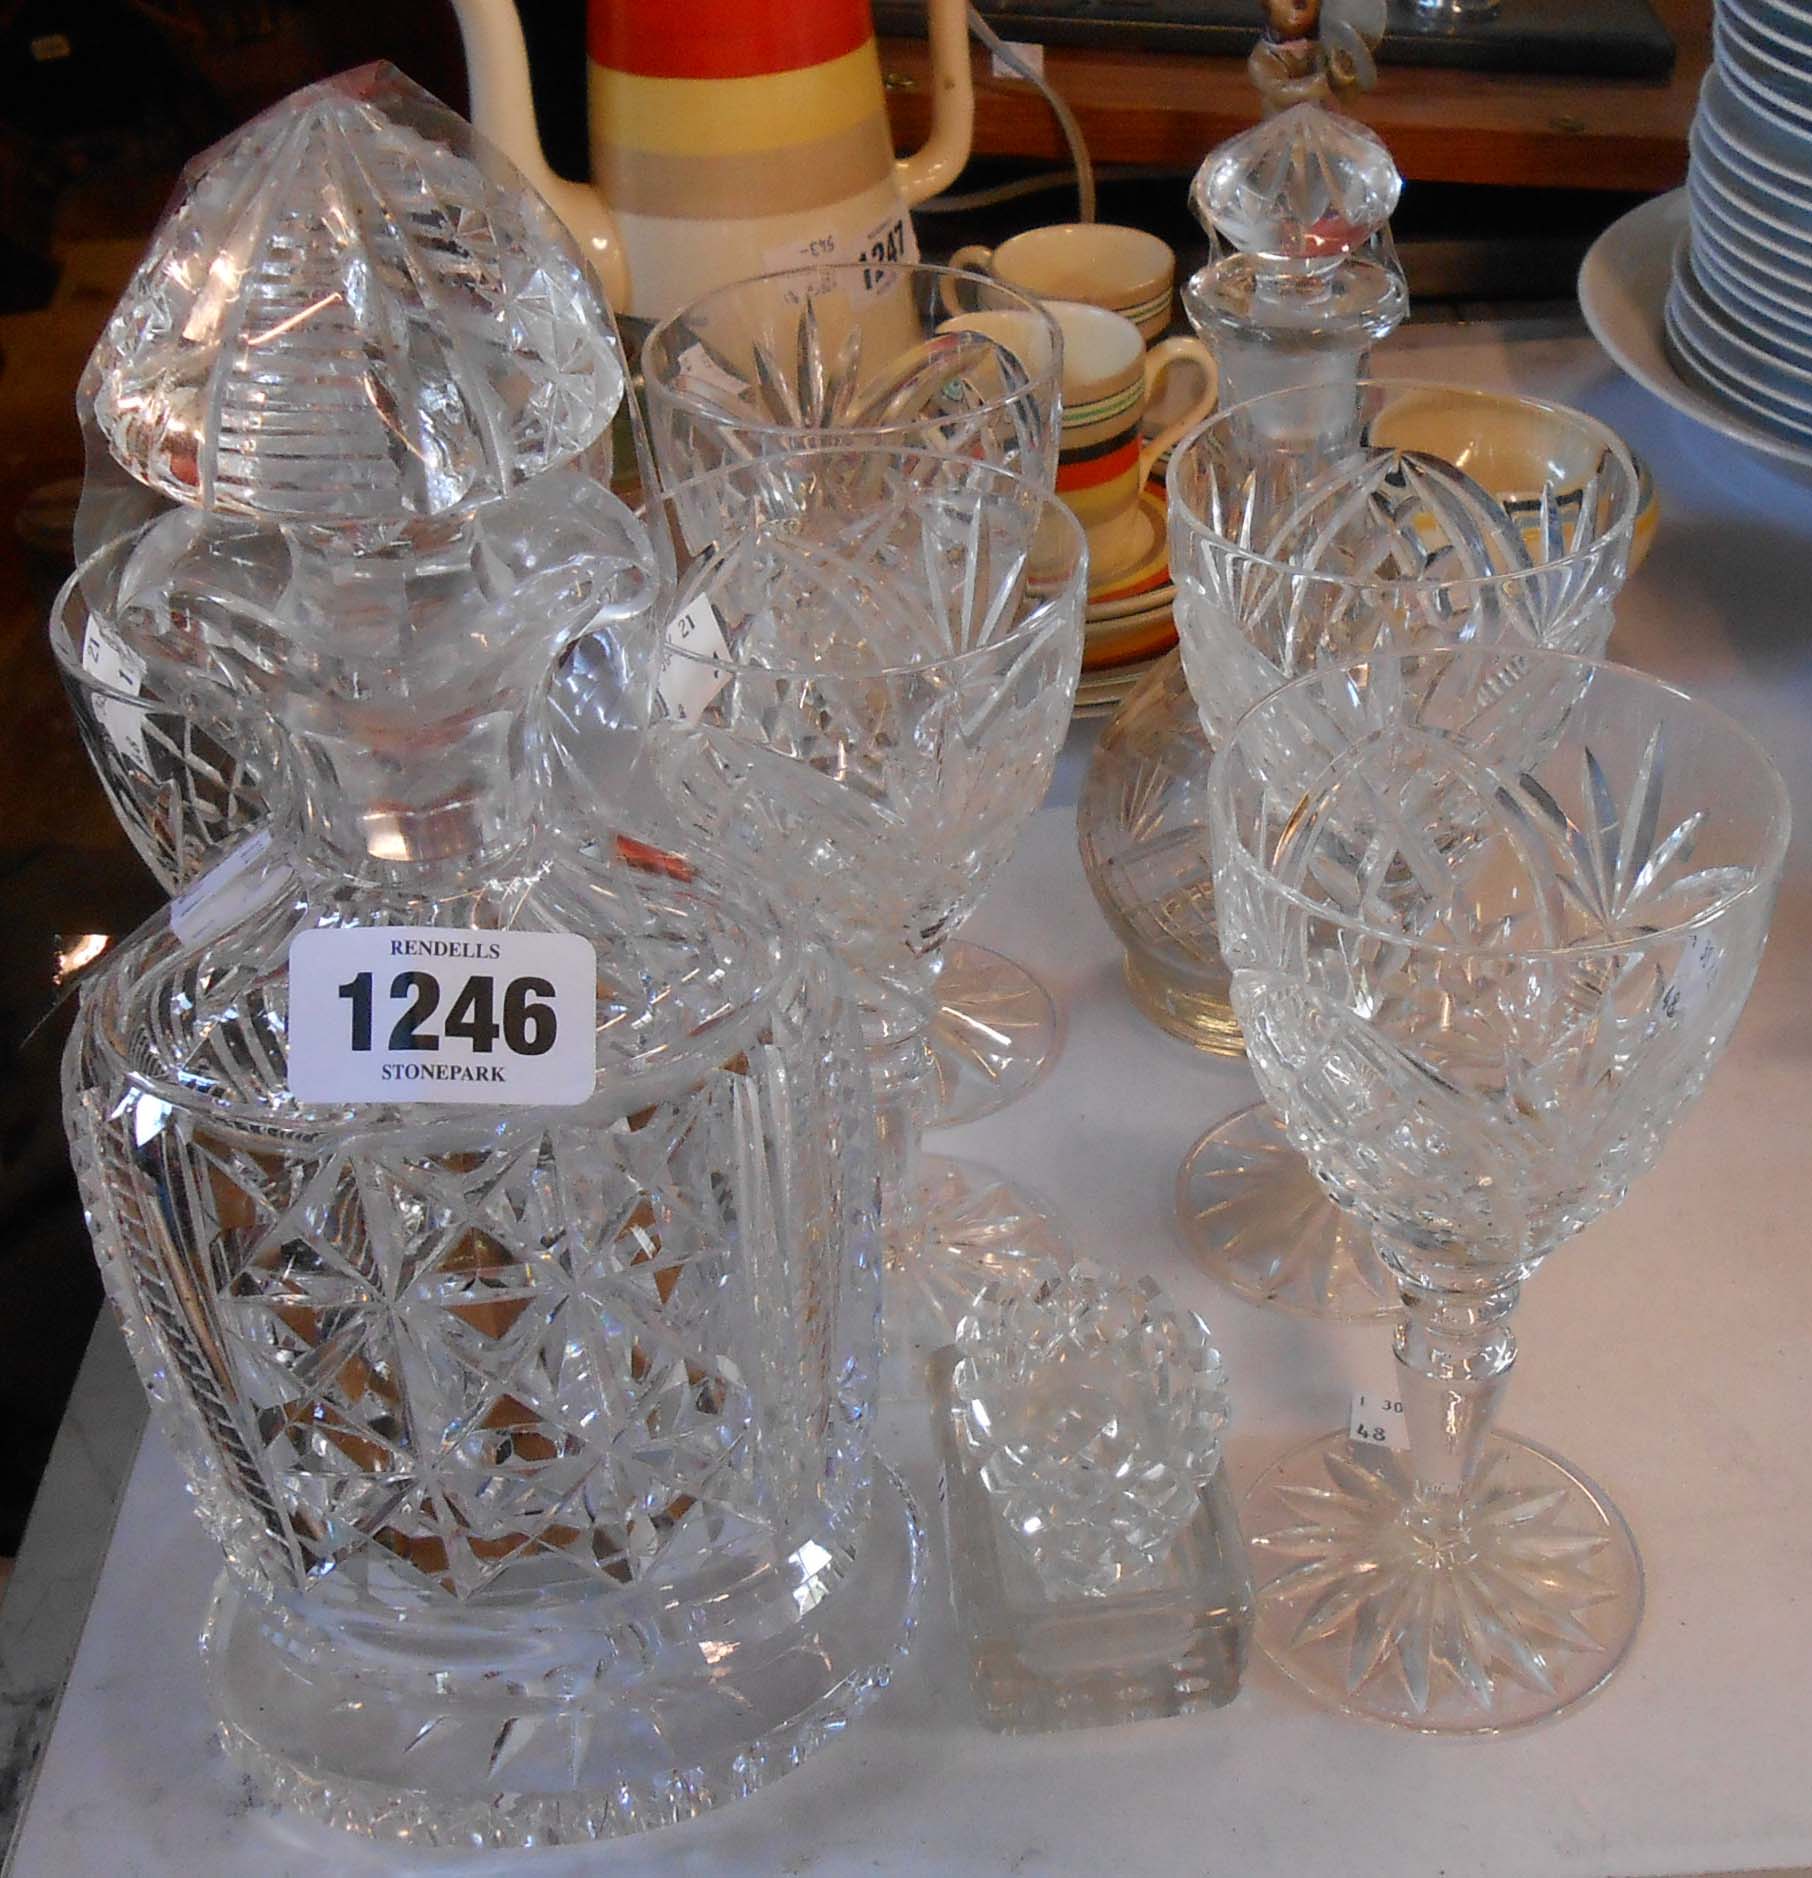 A heavy cut glass spirit decanter - sold with six goblets, etc.